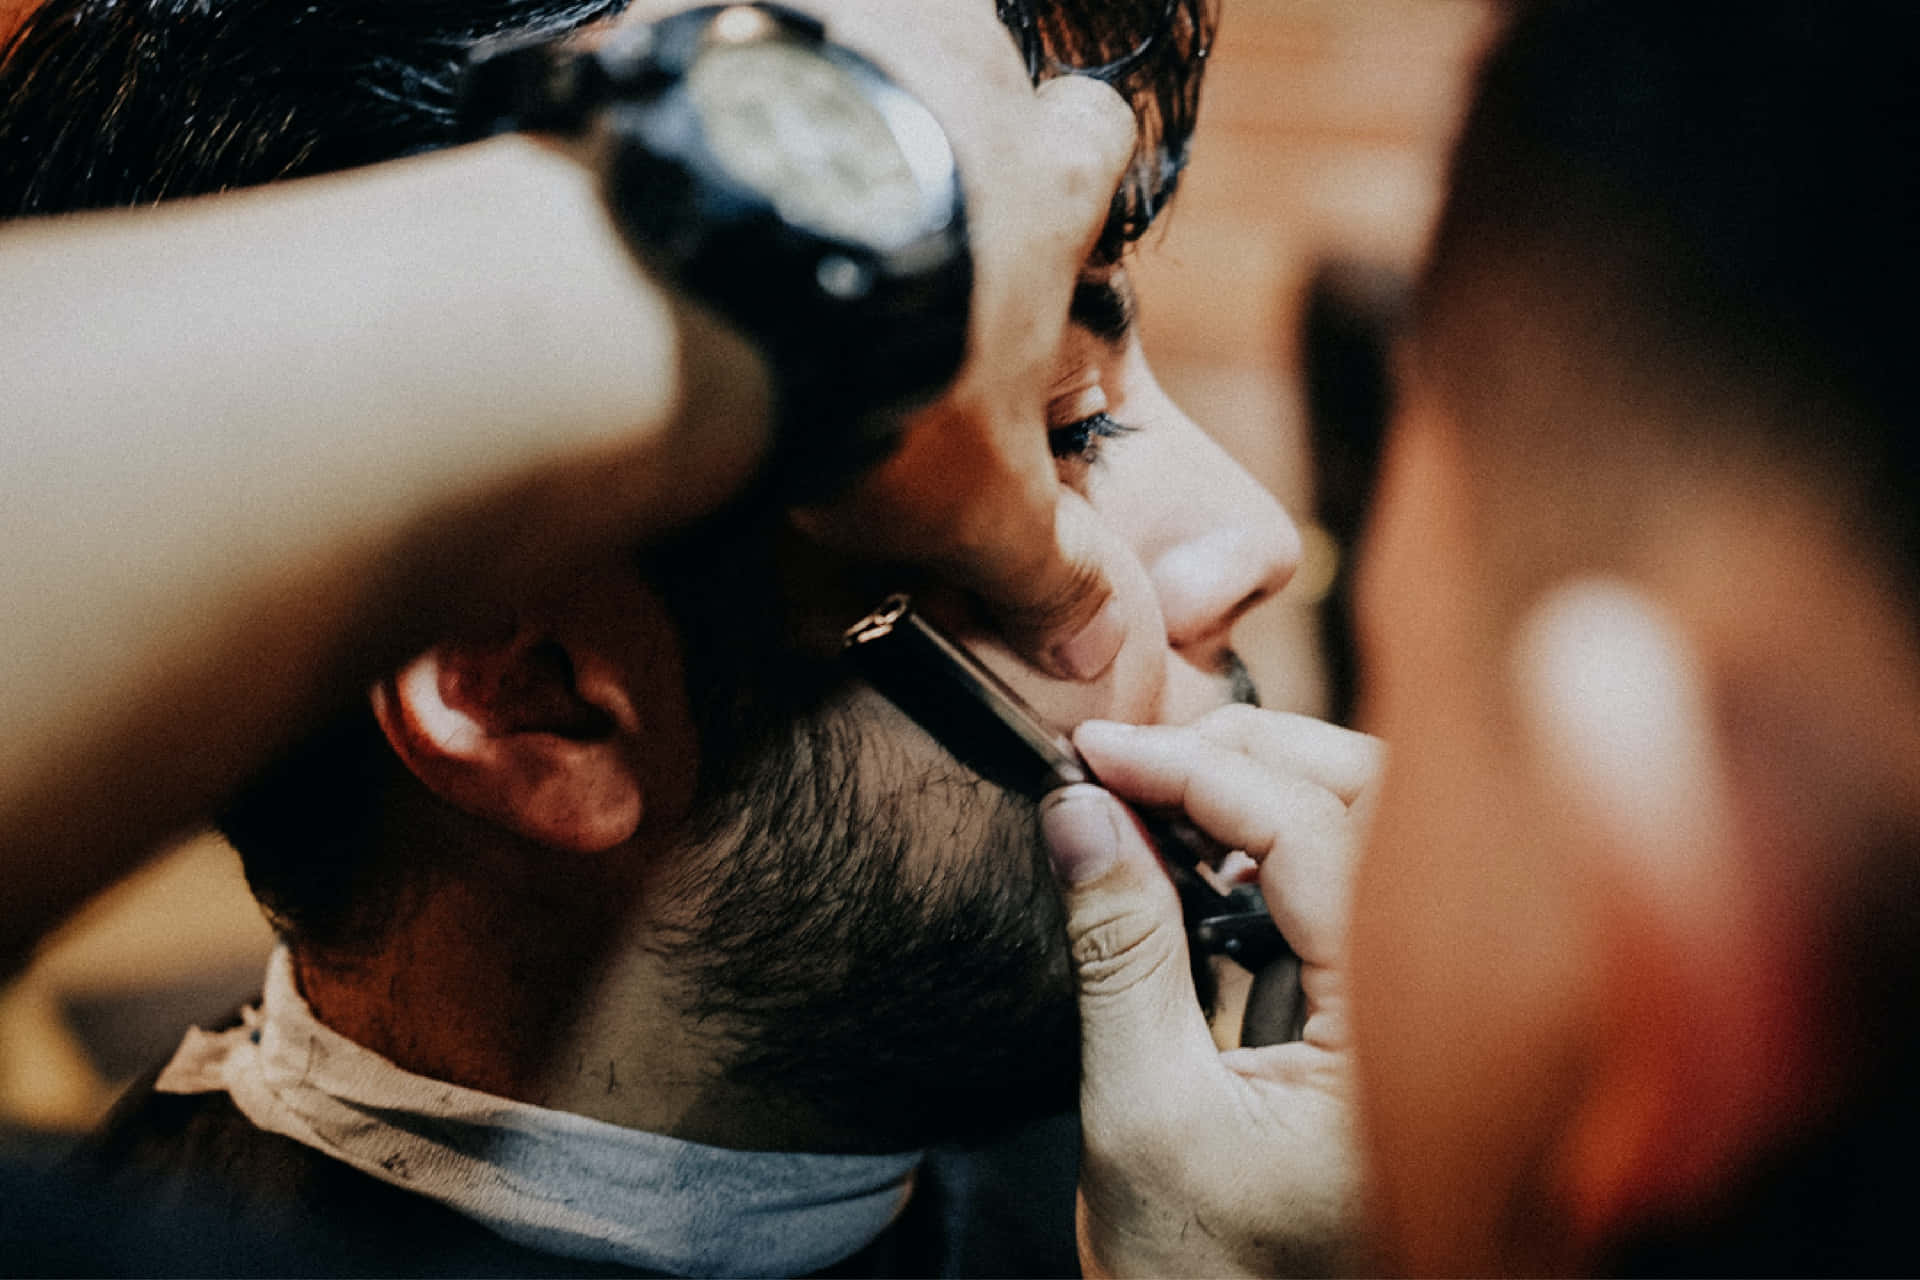 'A sleek traditional cut and shave from a skilled barber'